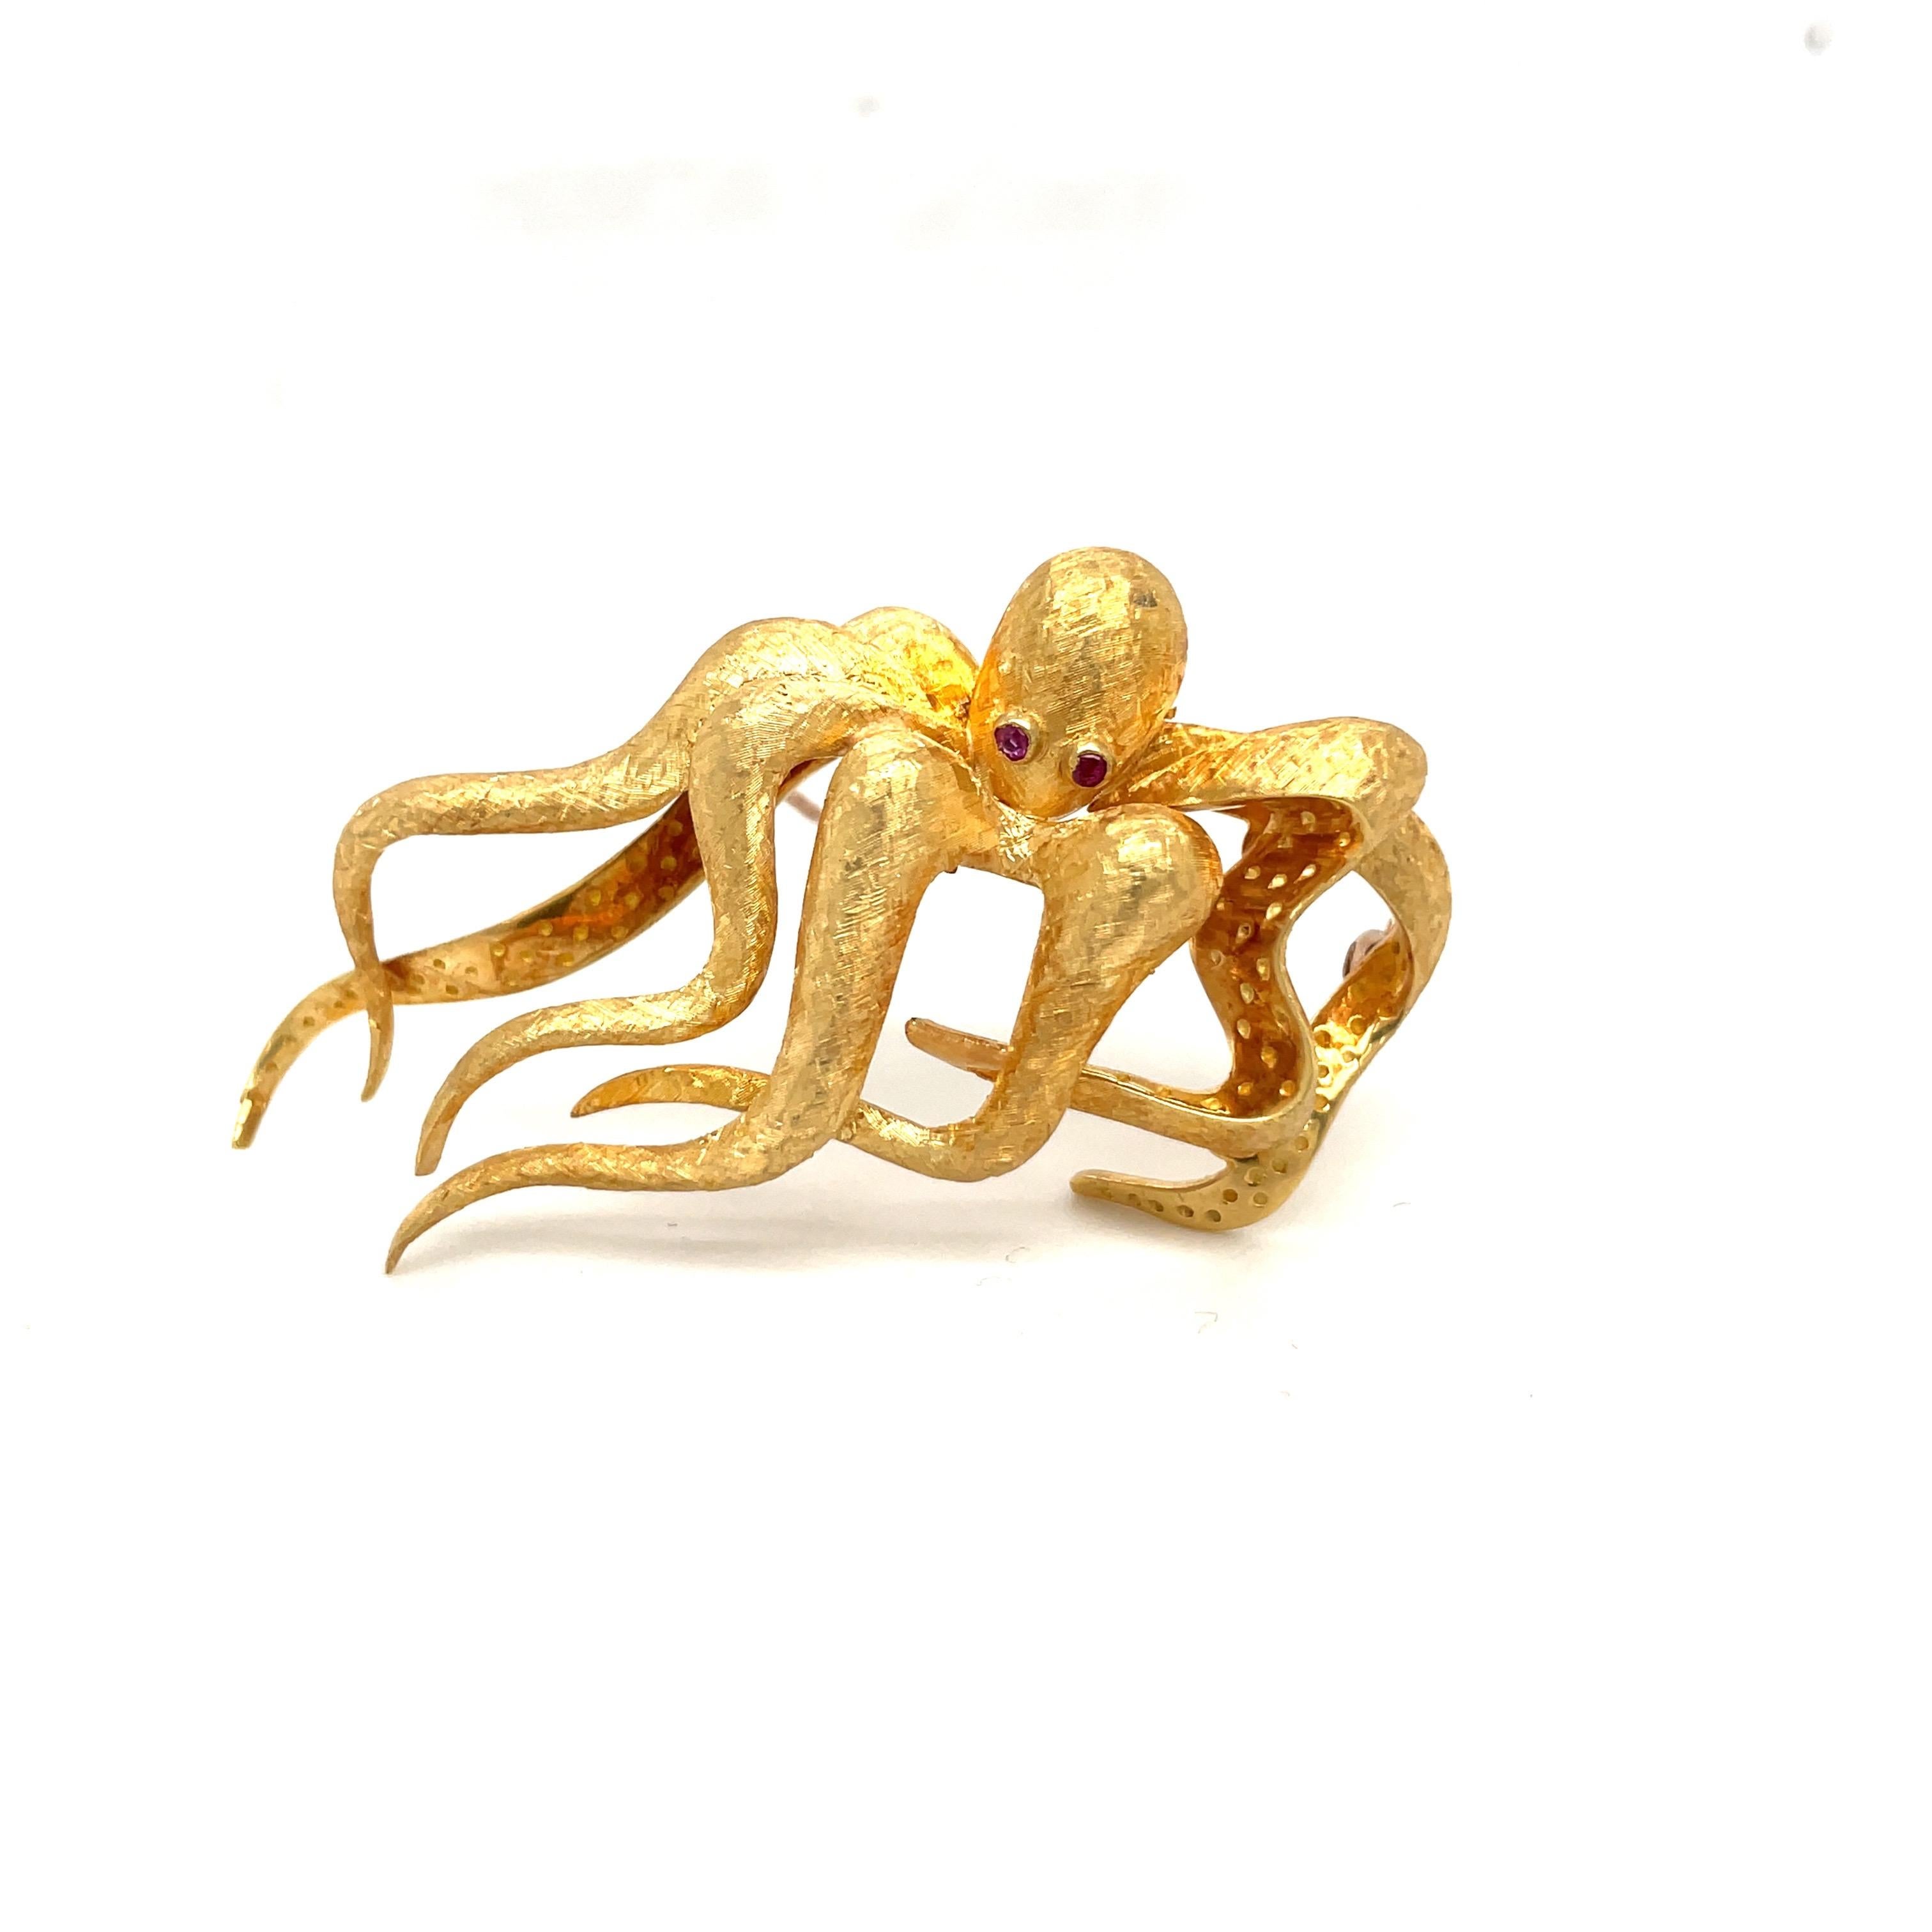 An 18 karat yellow gold octopus brooch. The octopus is crafted in a matte finis with bezel set ruby eyes. He measures 2